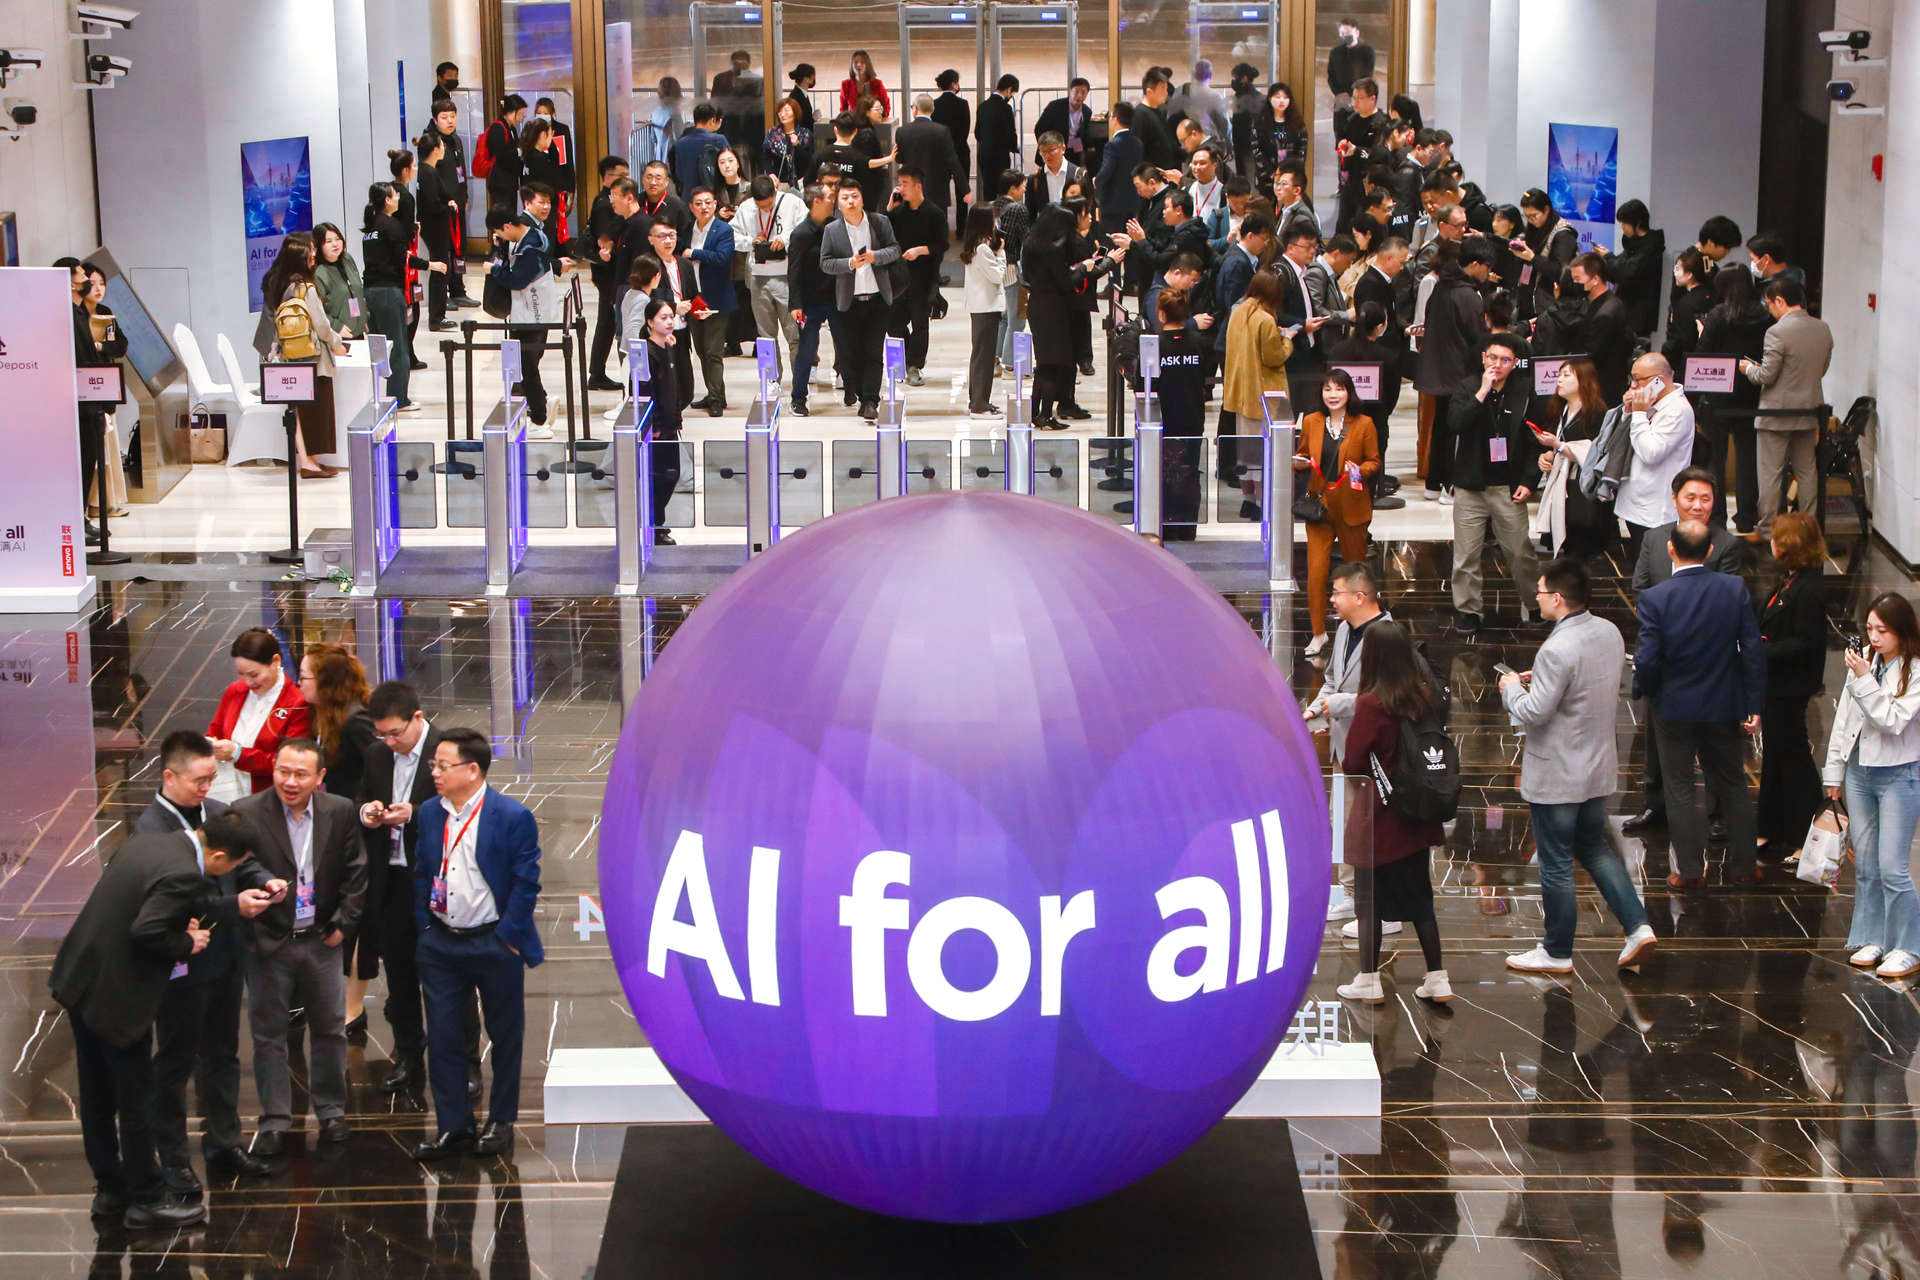 AI for all signage and crowds at Tech World Shanghai